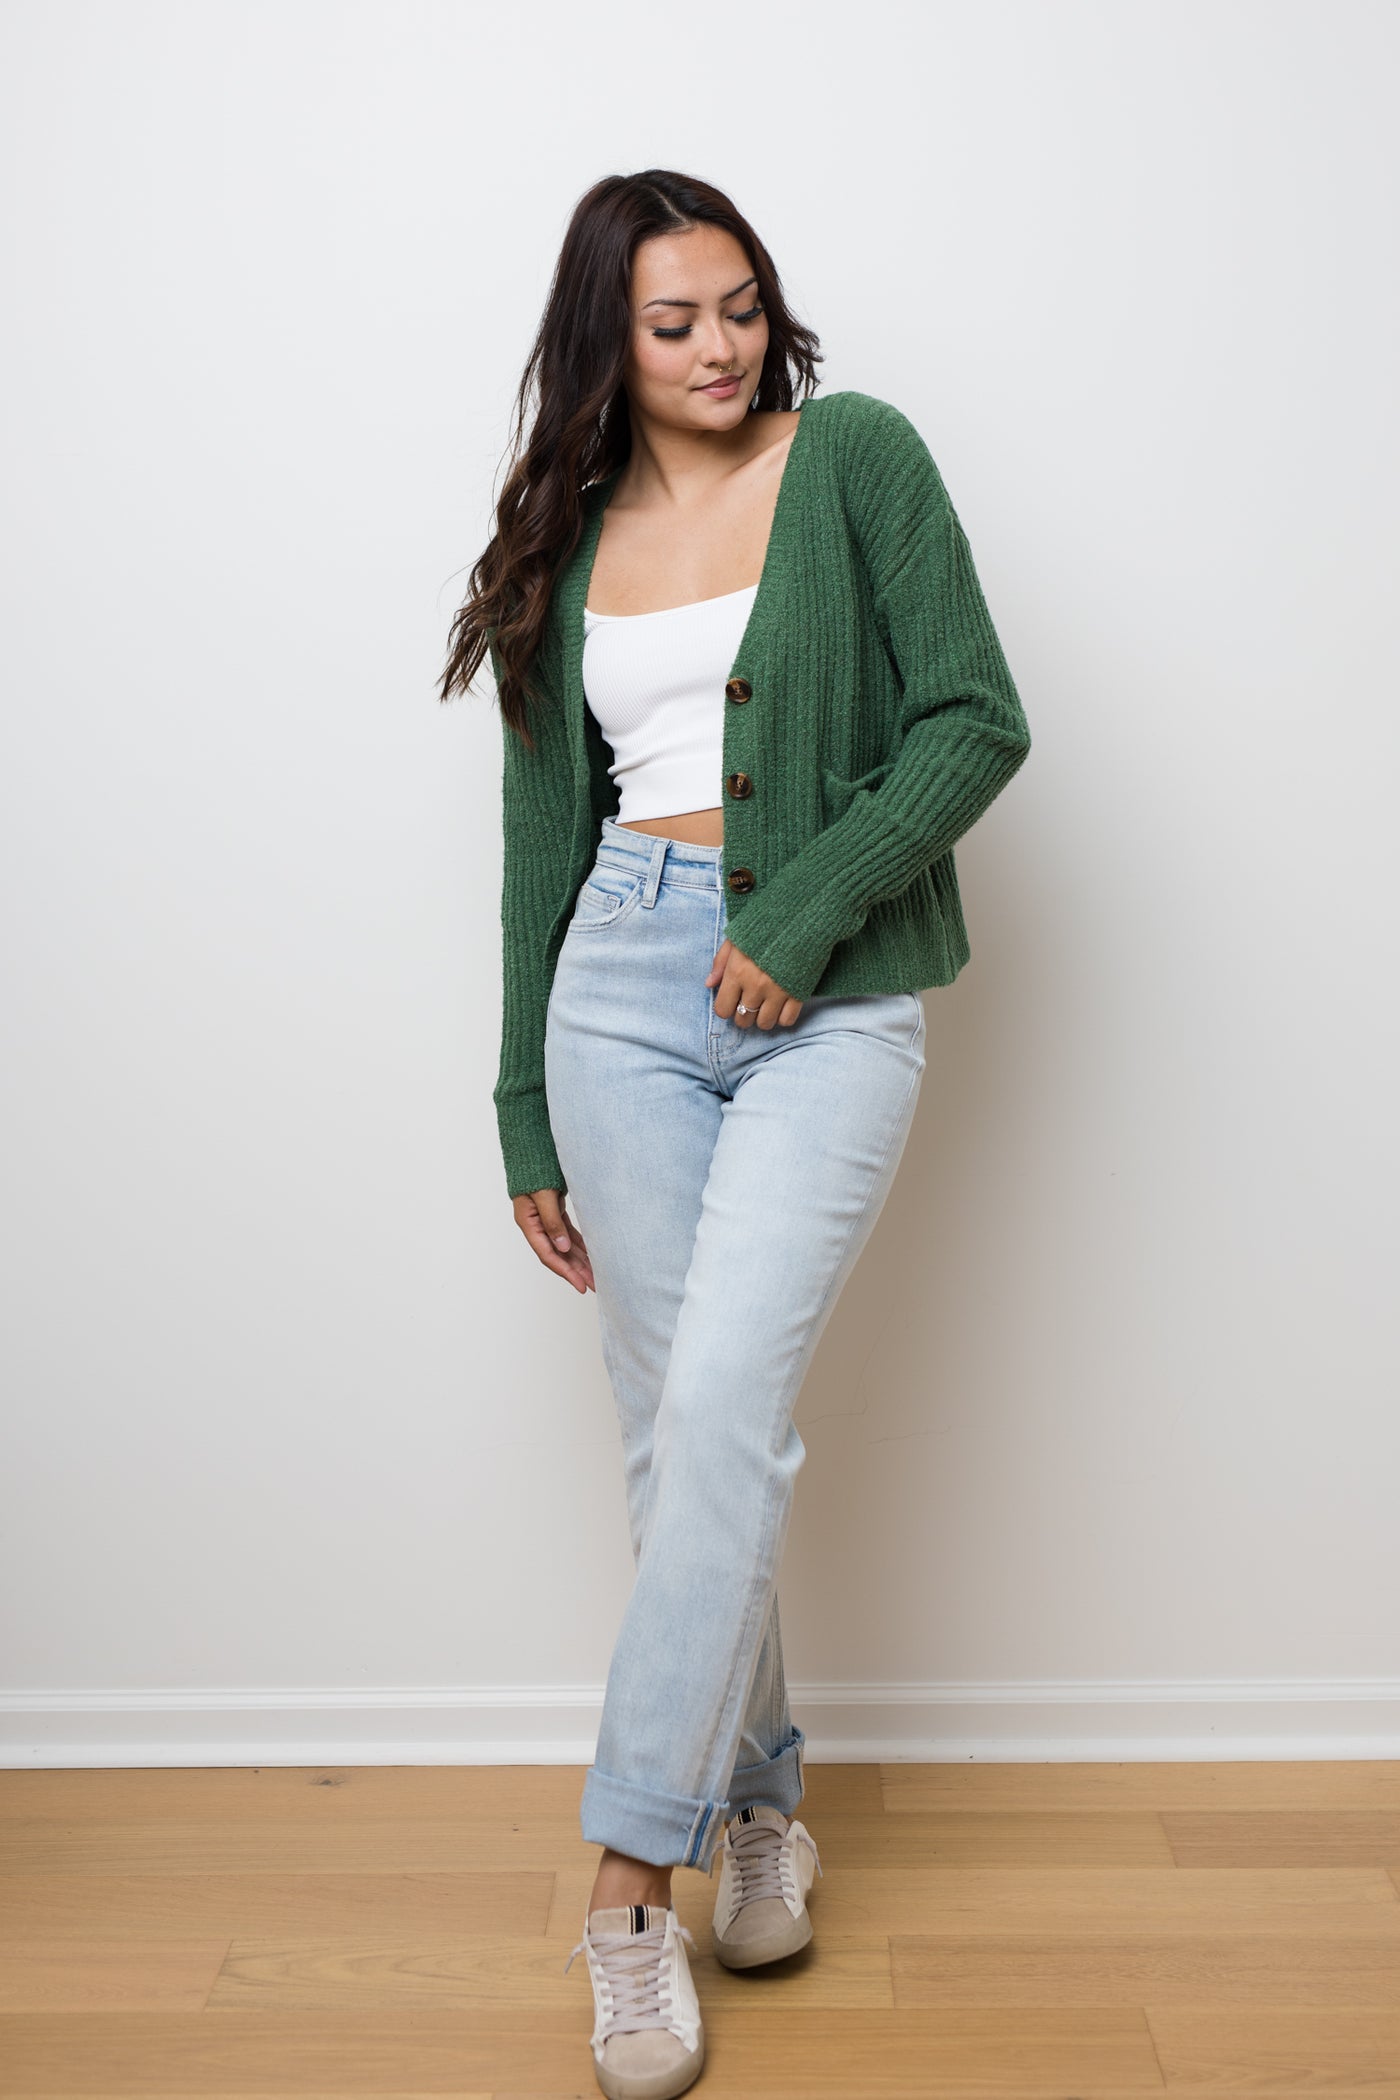 The Marleigh Green Knit Cardigan Sweater